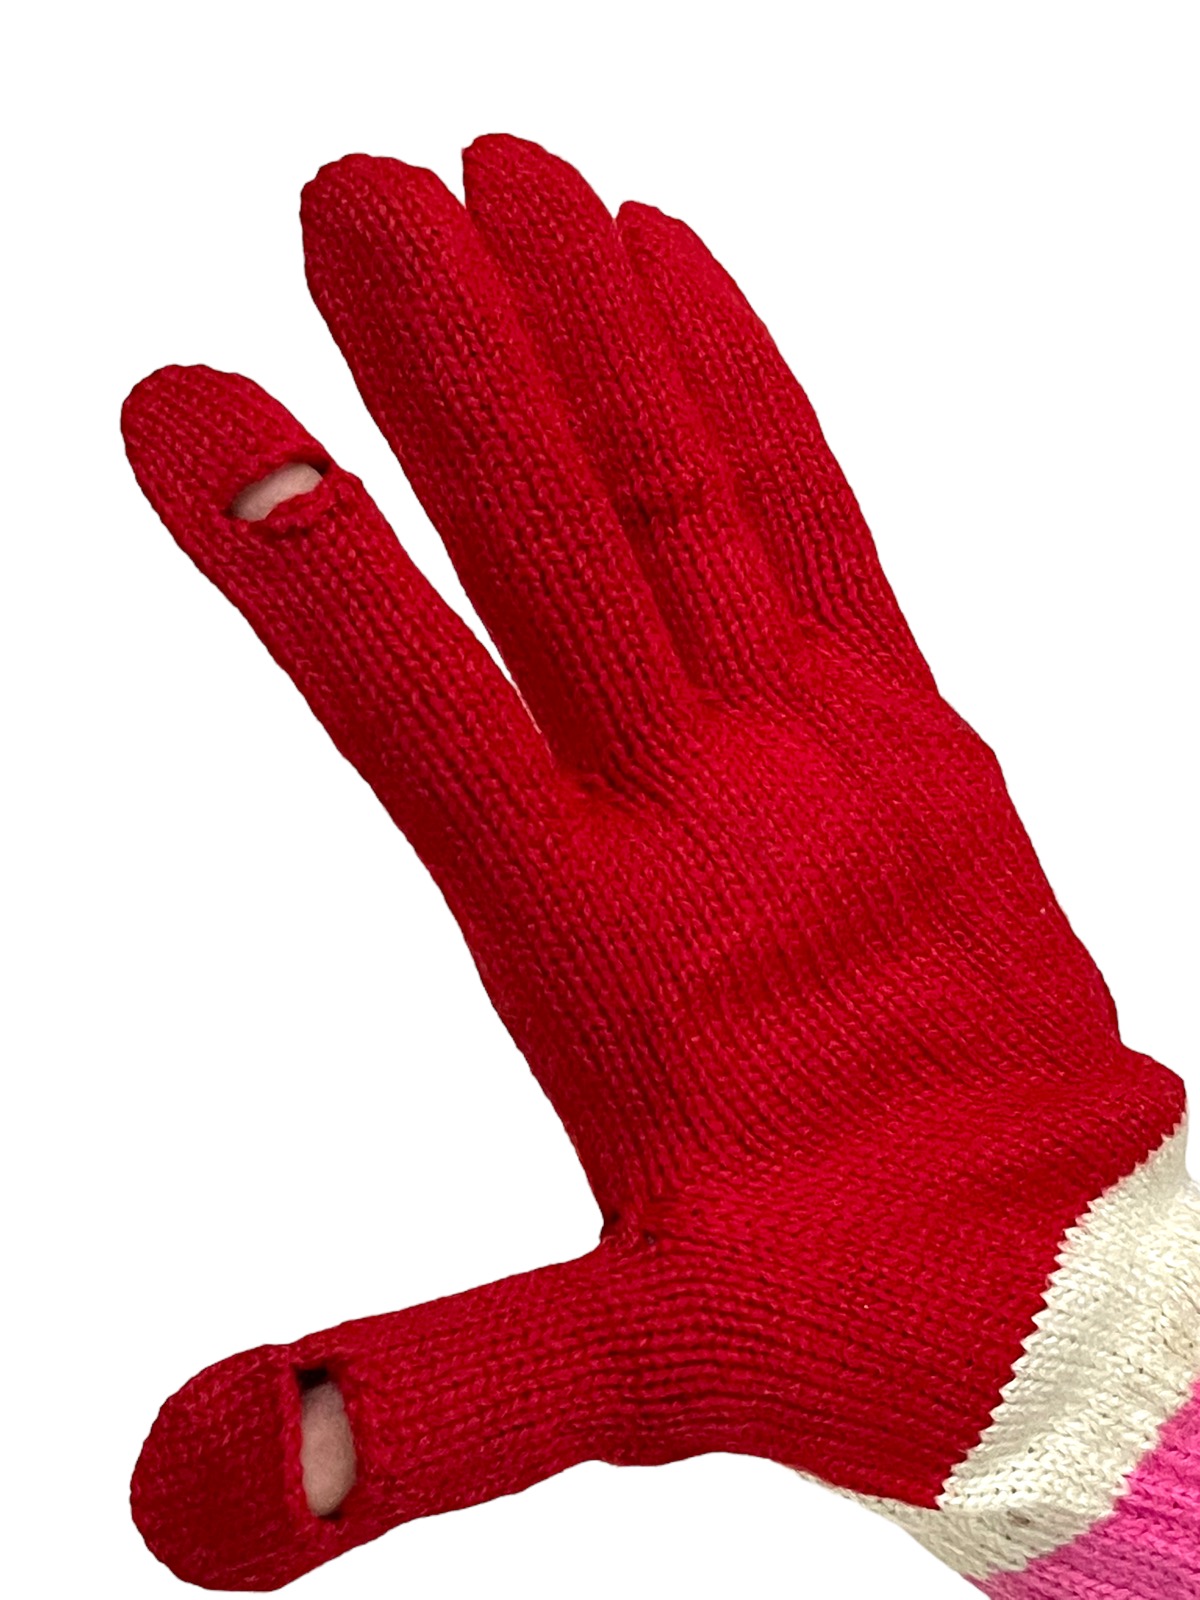 Vivienne Westwood Anglomania Gloves - 5